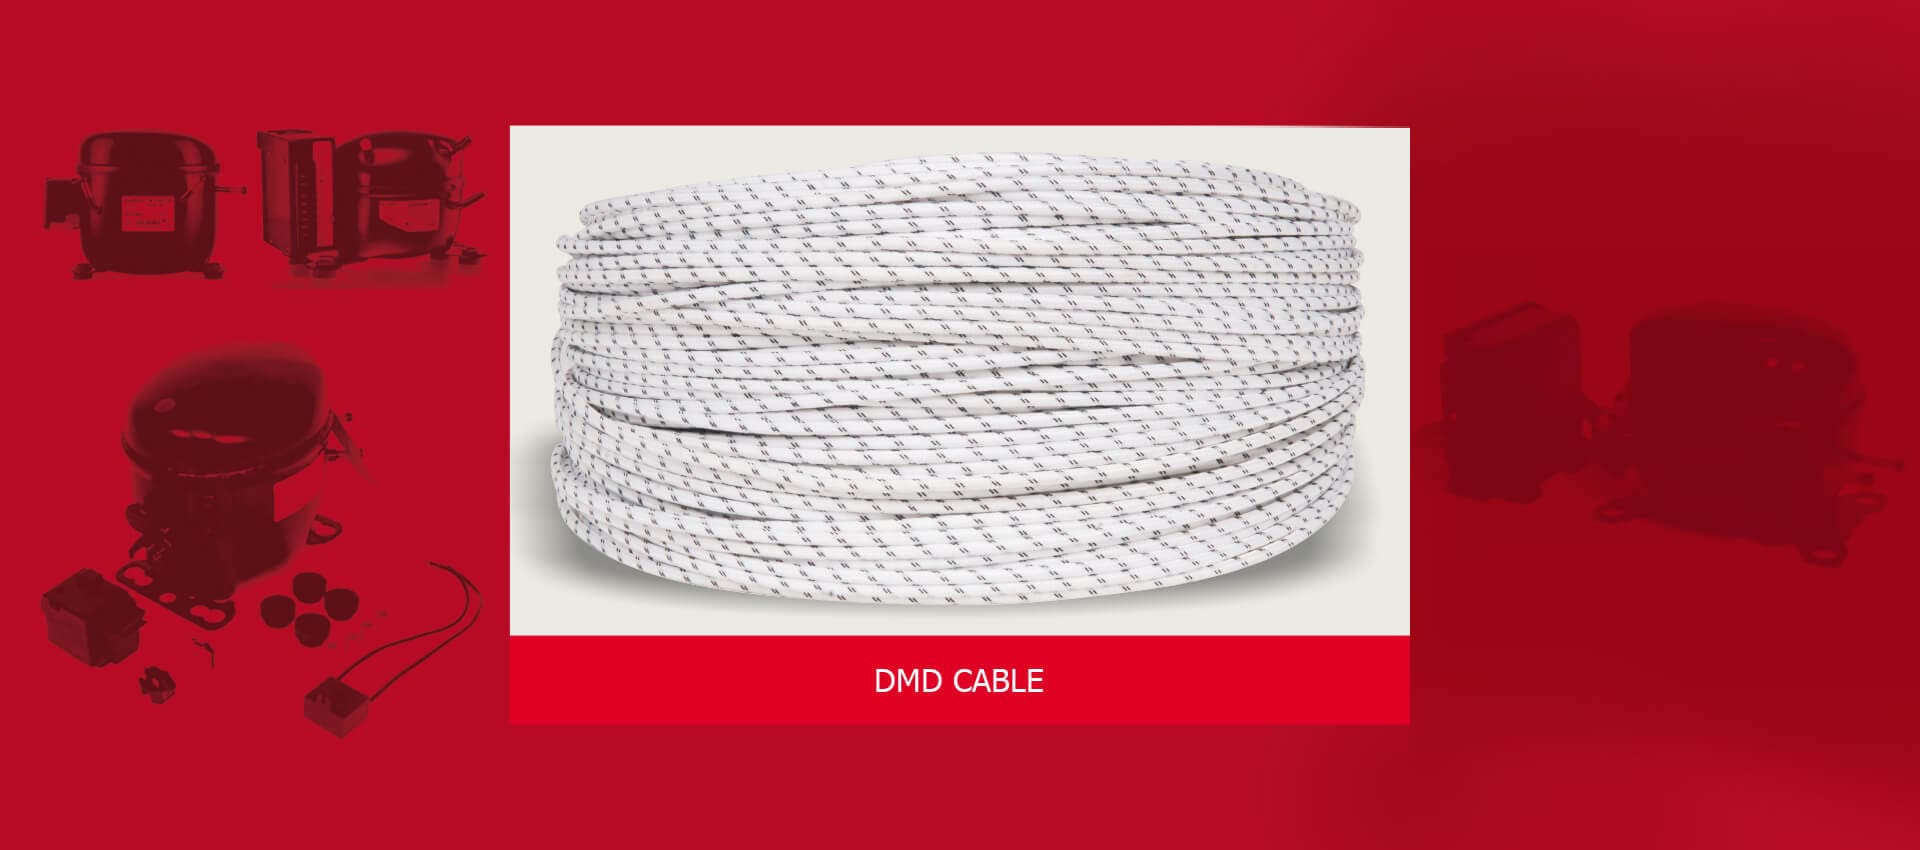 Polywin Wires & Cables, Khandelwal Cables, Polybest, Wires manufacturer, Cables Manufacturer, Wires & Cables, Best quality Wire manufacturer, best quality cable manufacturer, in vadodara, gujarat, india